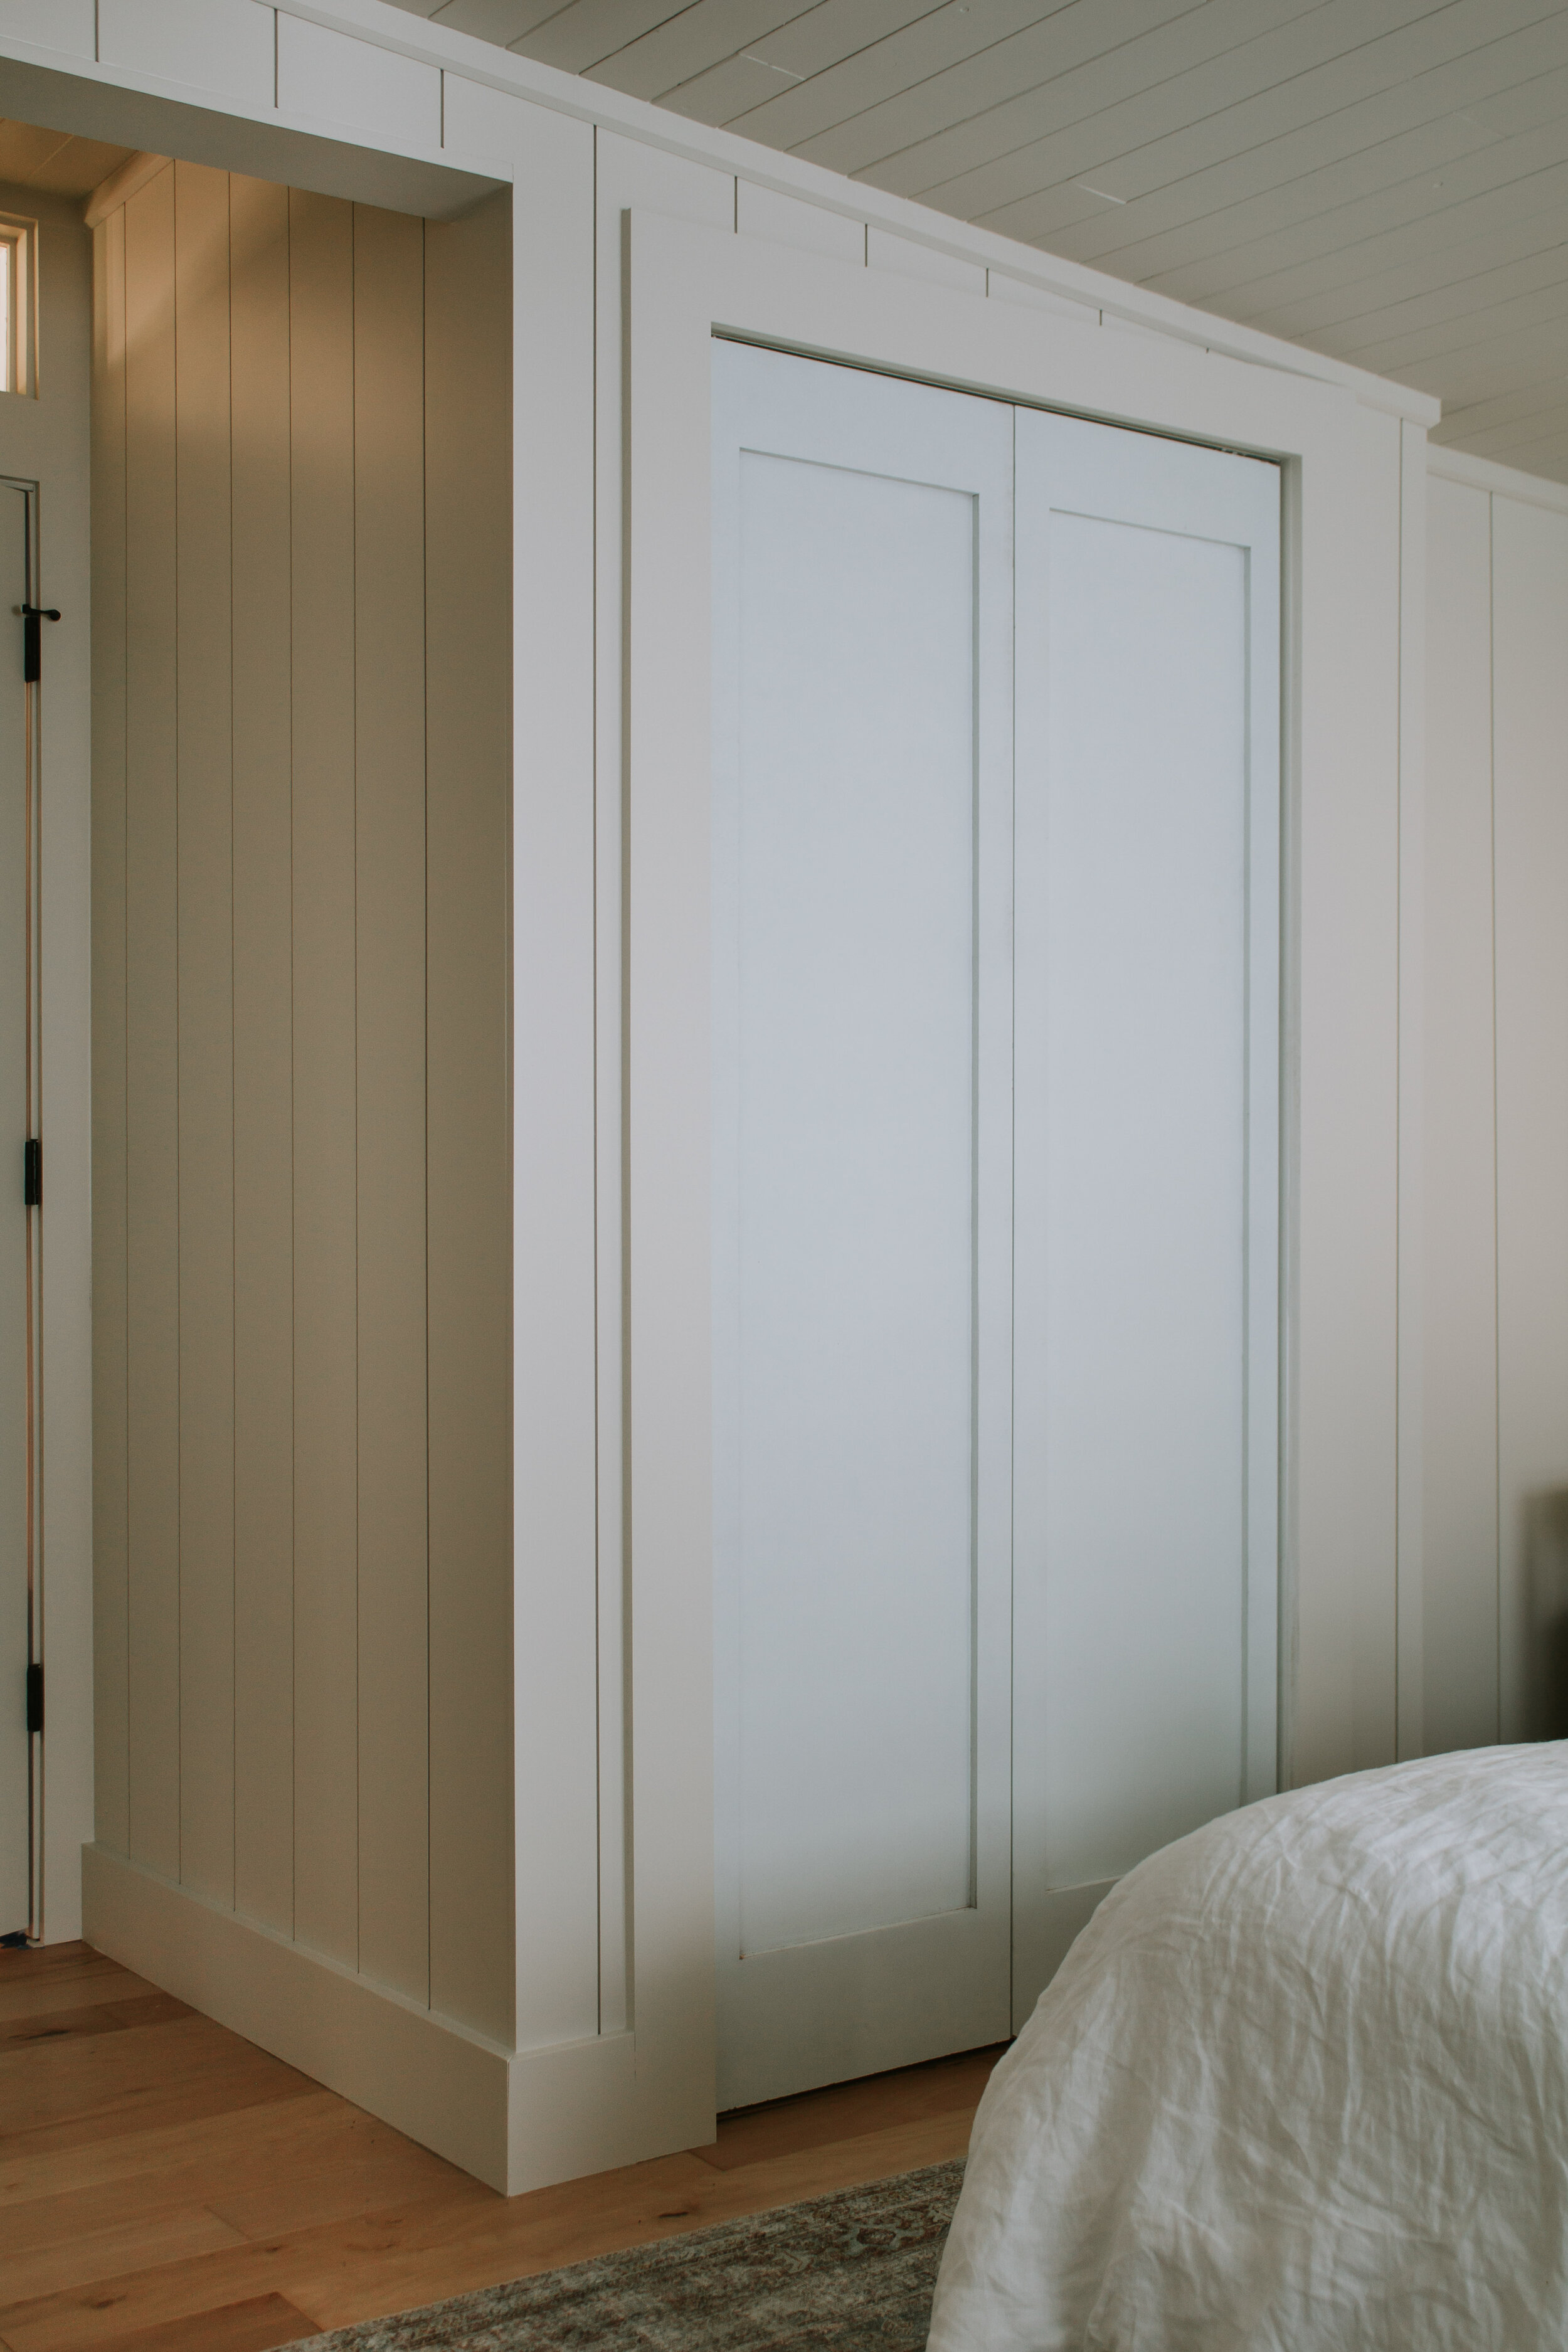 BEFORE | How we customized our standard bifold doors to look like high end double doors for less than $25. How to DIY and customize a single panel door with antique handles and knobs. Bedroom closet door inspiration. | Nadine Stay